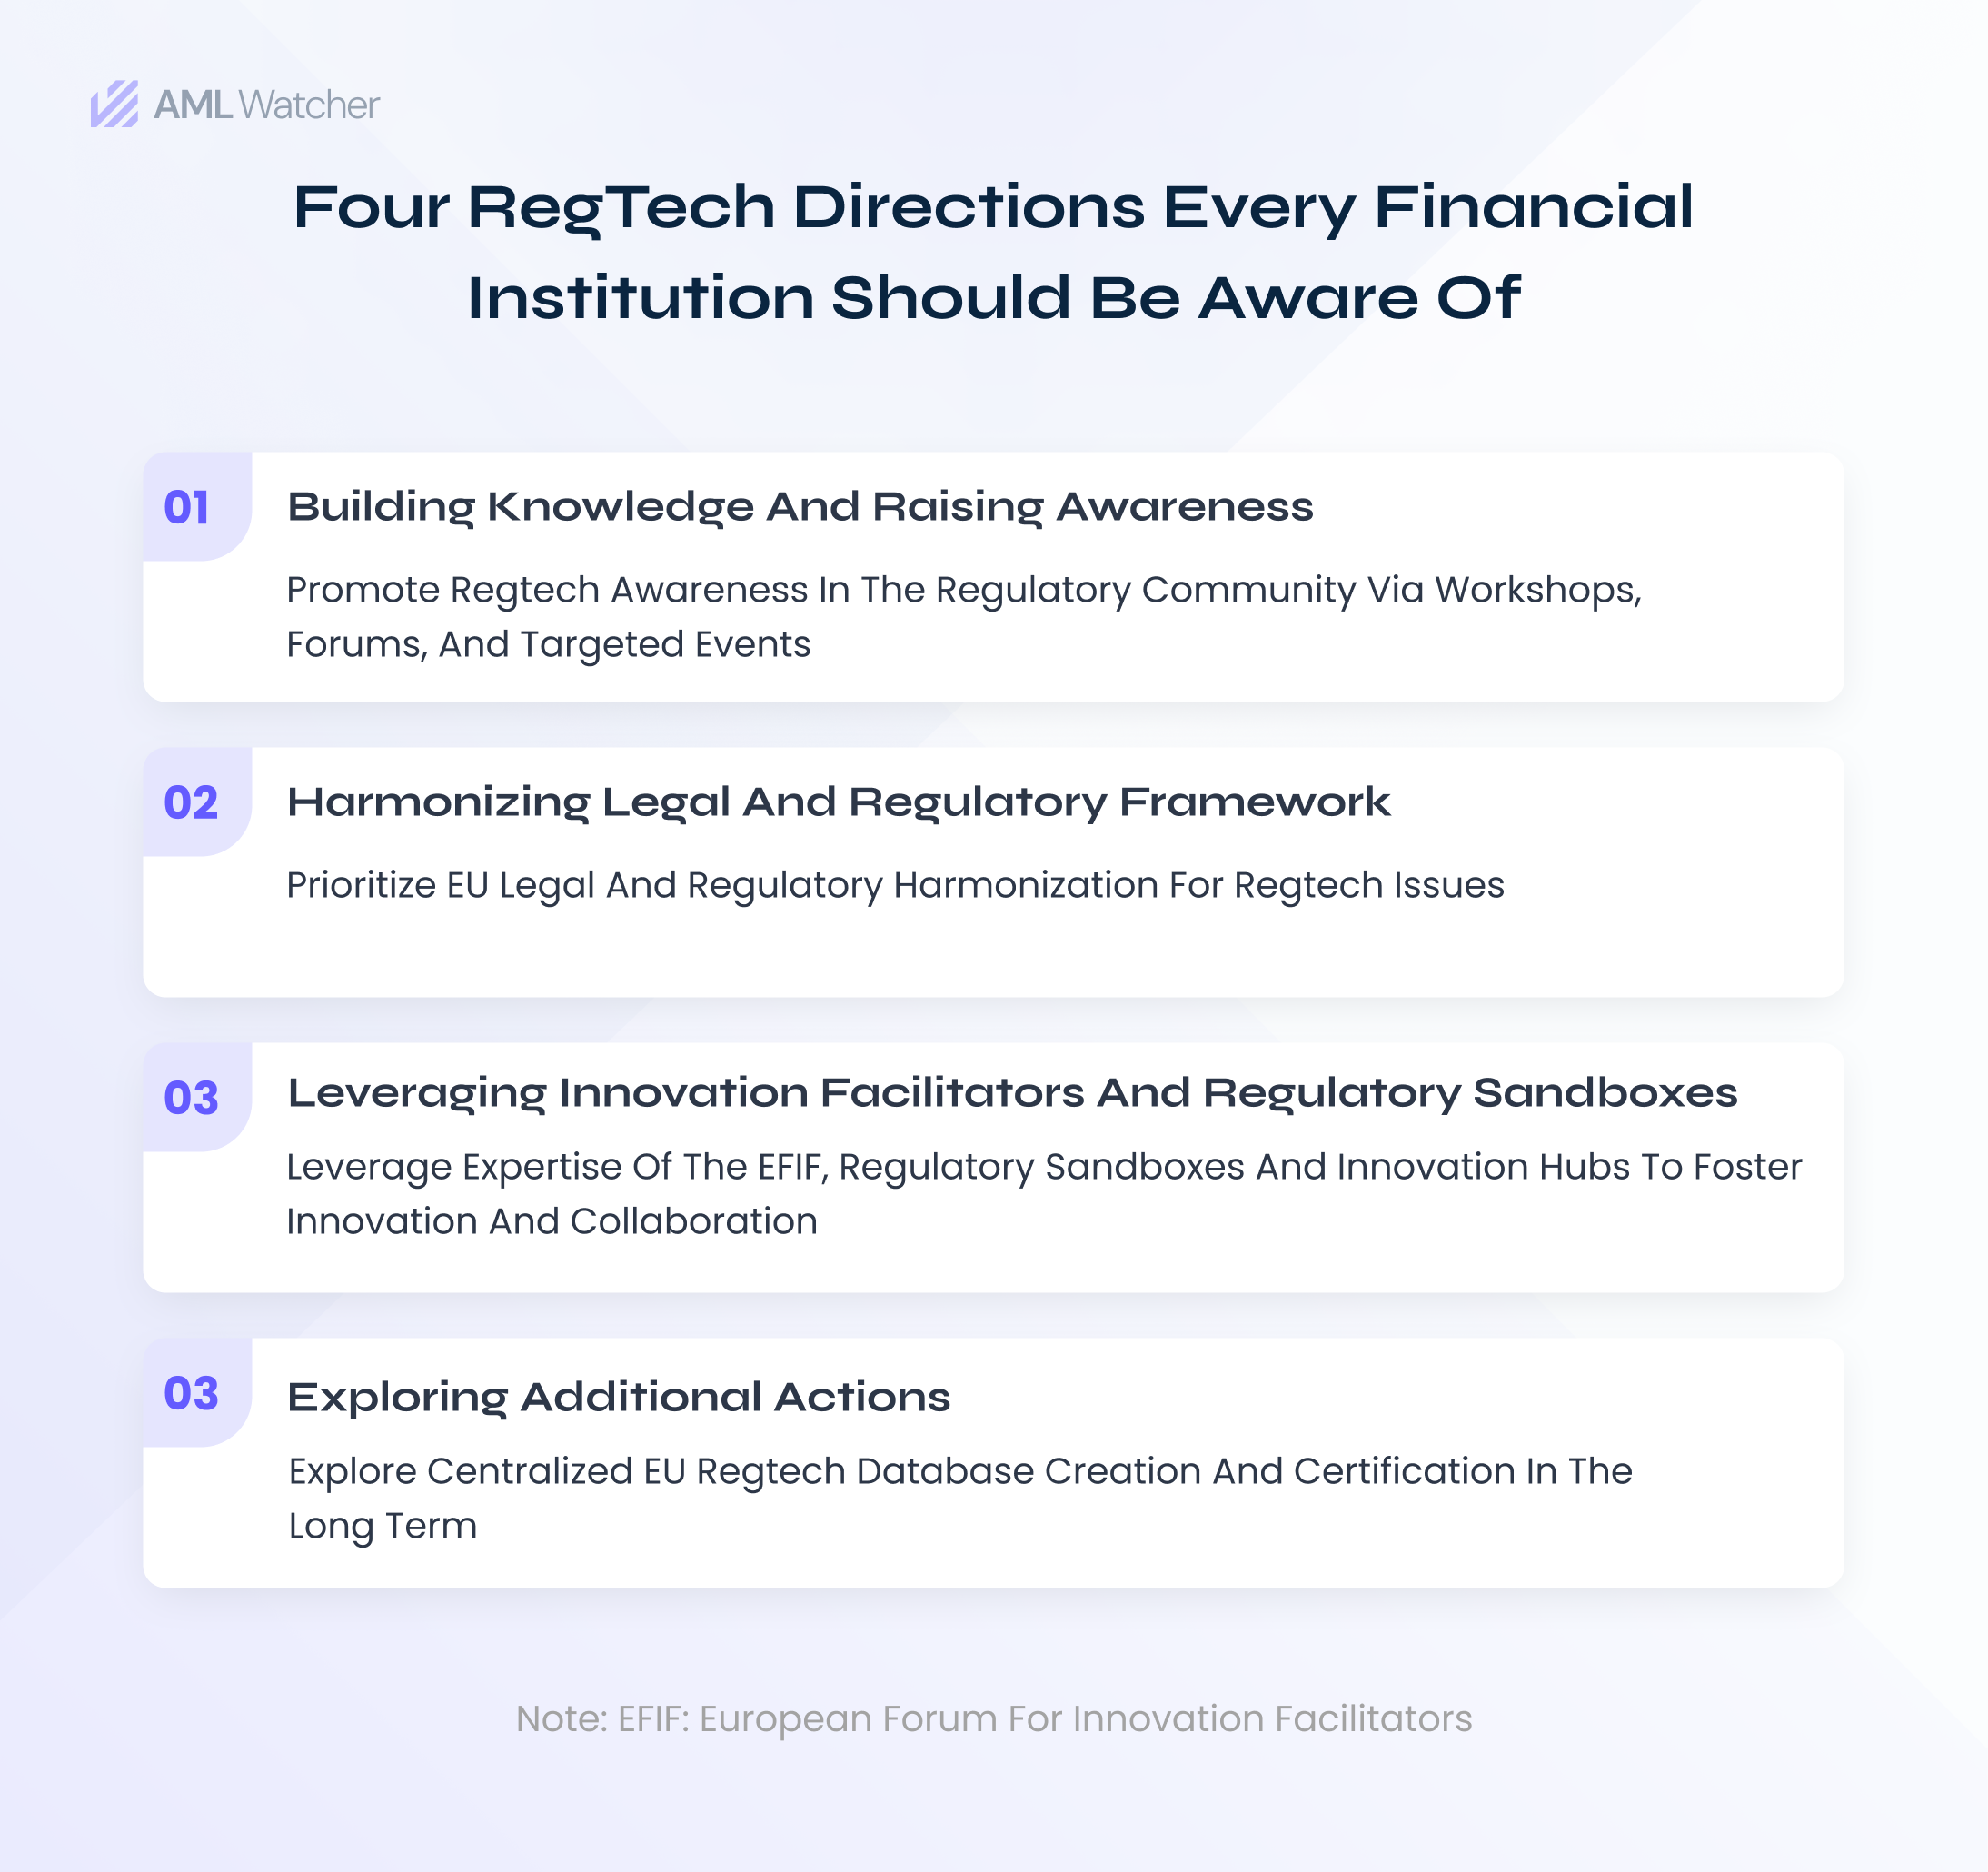 The featured image displays the key directions relevant to RegTech employment in the financial sector, outlined by the EBA.